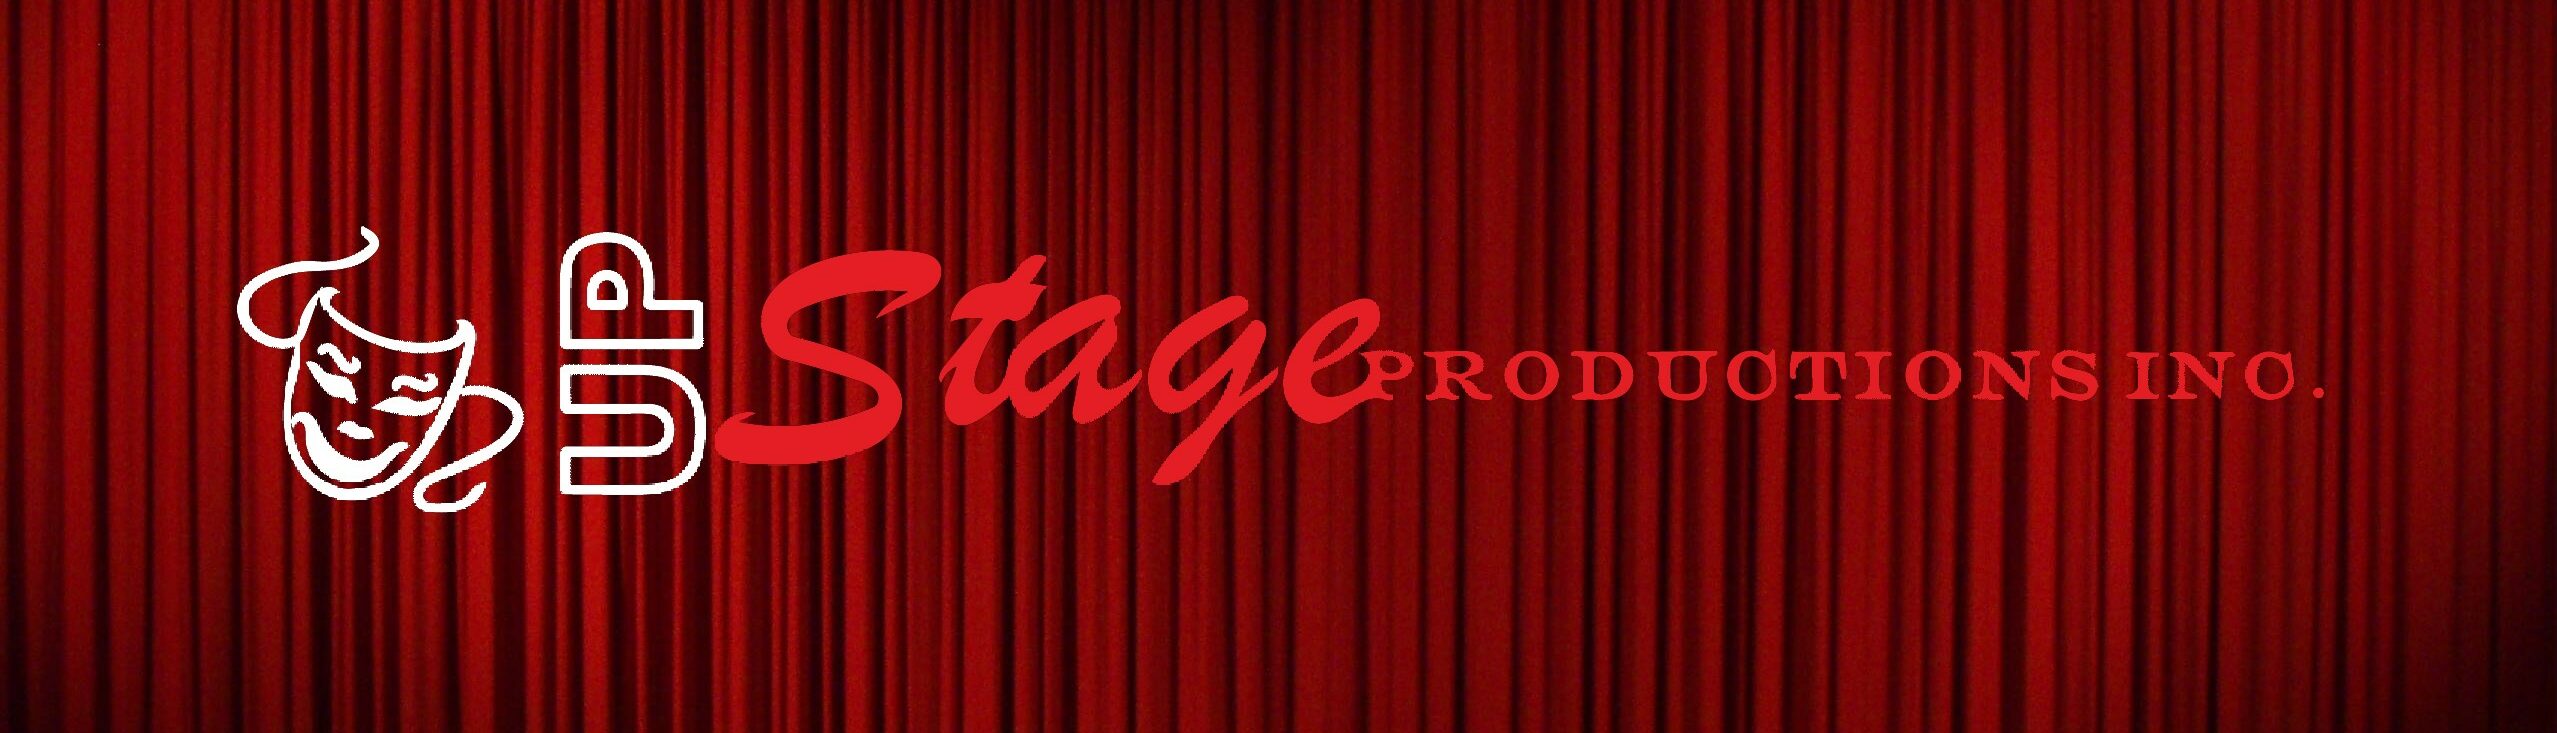 Upstage Productions Inc.